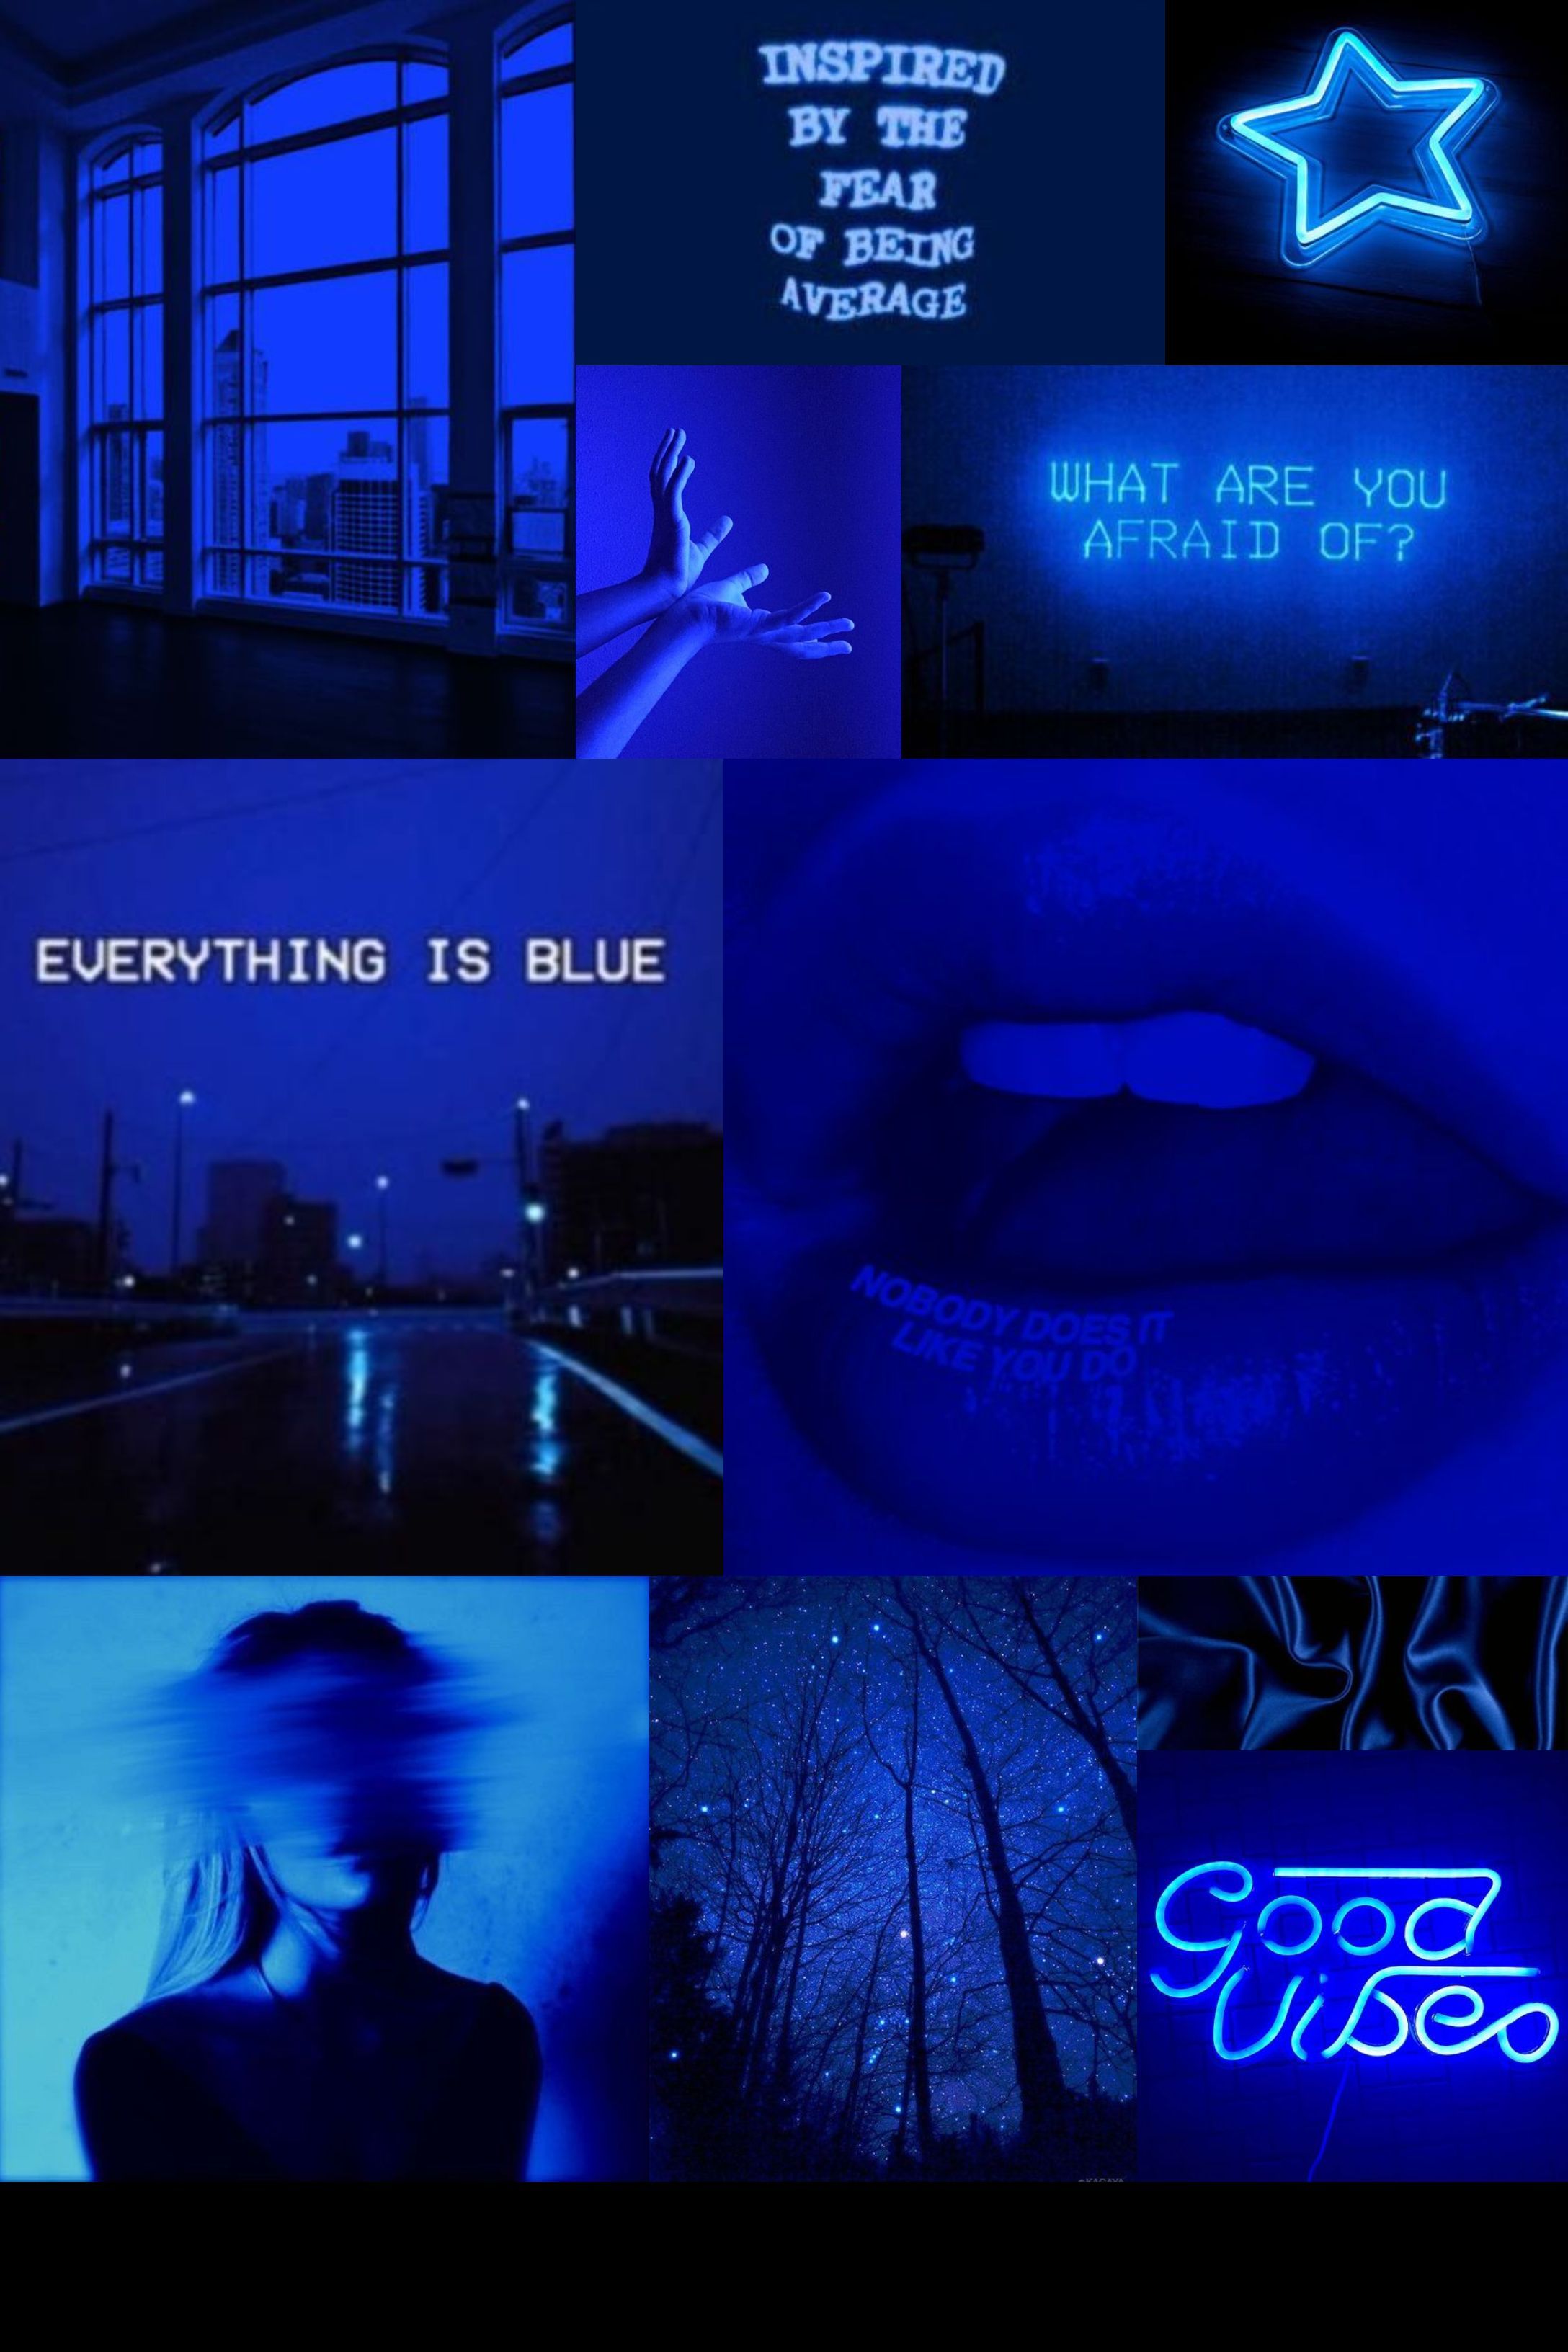 Blue mood board aesthetic collage wallpaper. Blue aesthetic dark, Dark blue wallpaper, Blue aesthetic